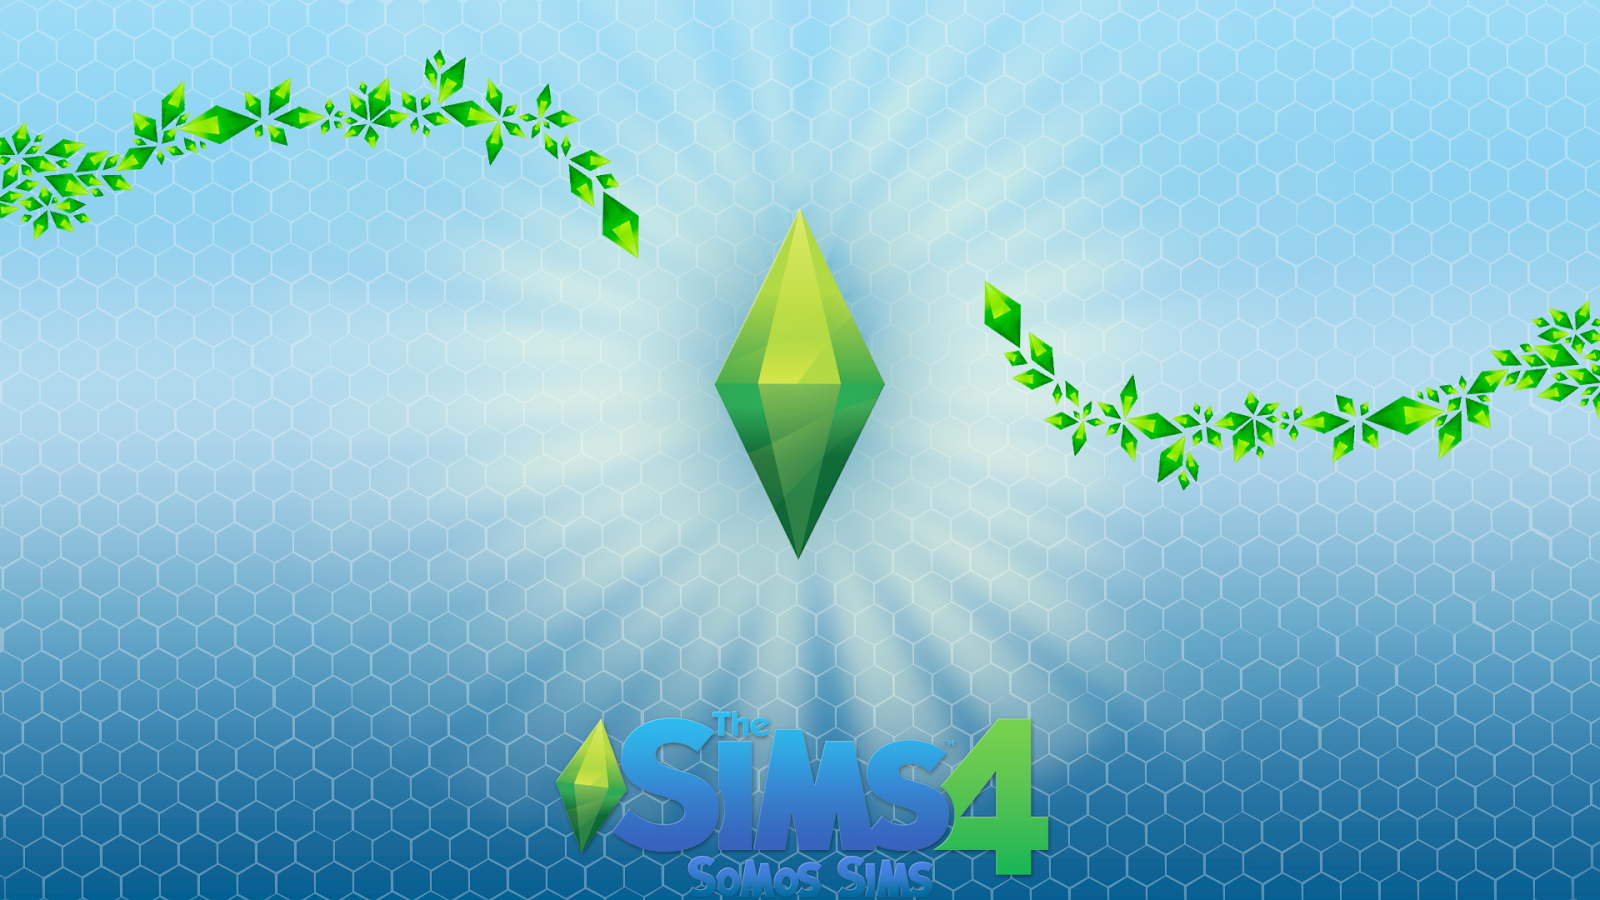 Sims Wallpaper HD Full Pictures